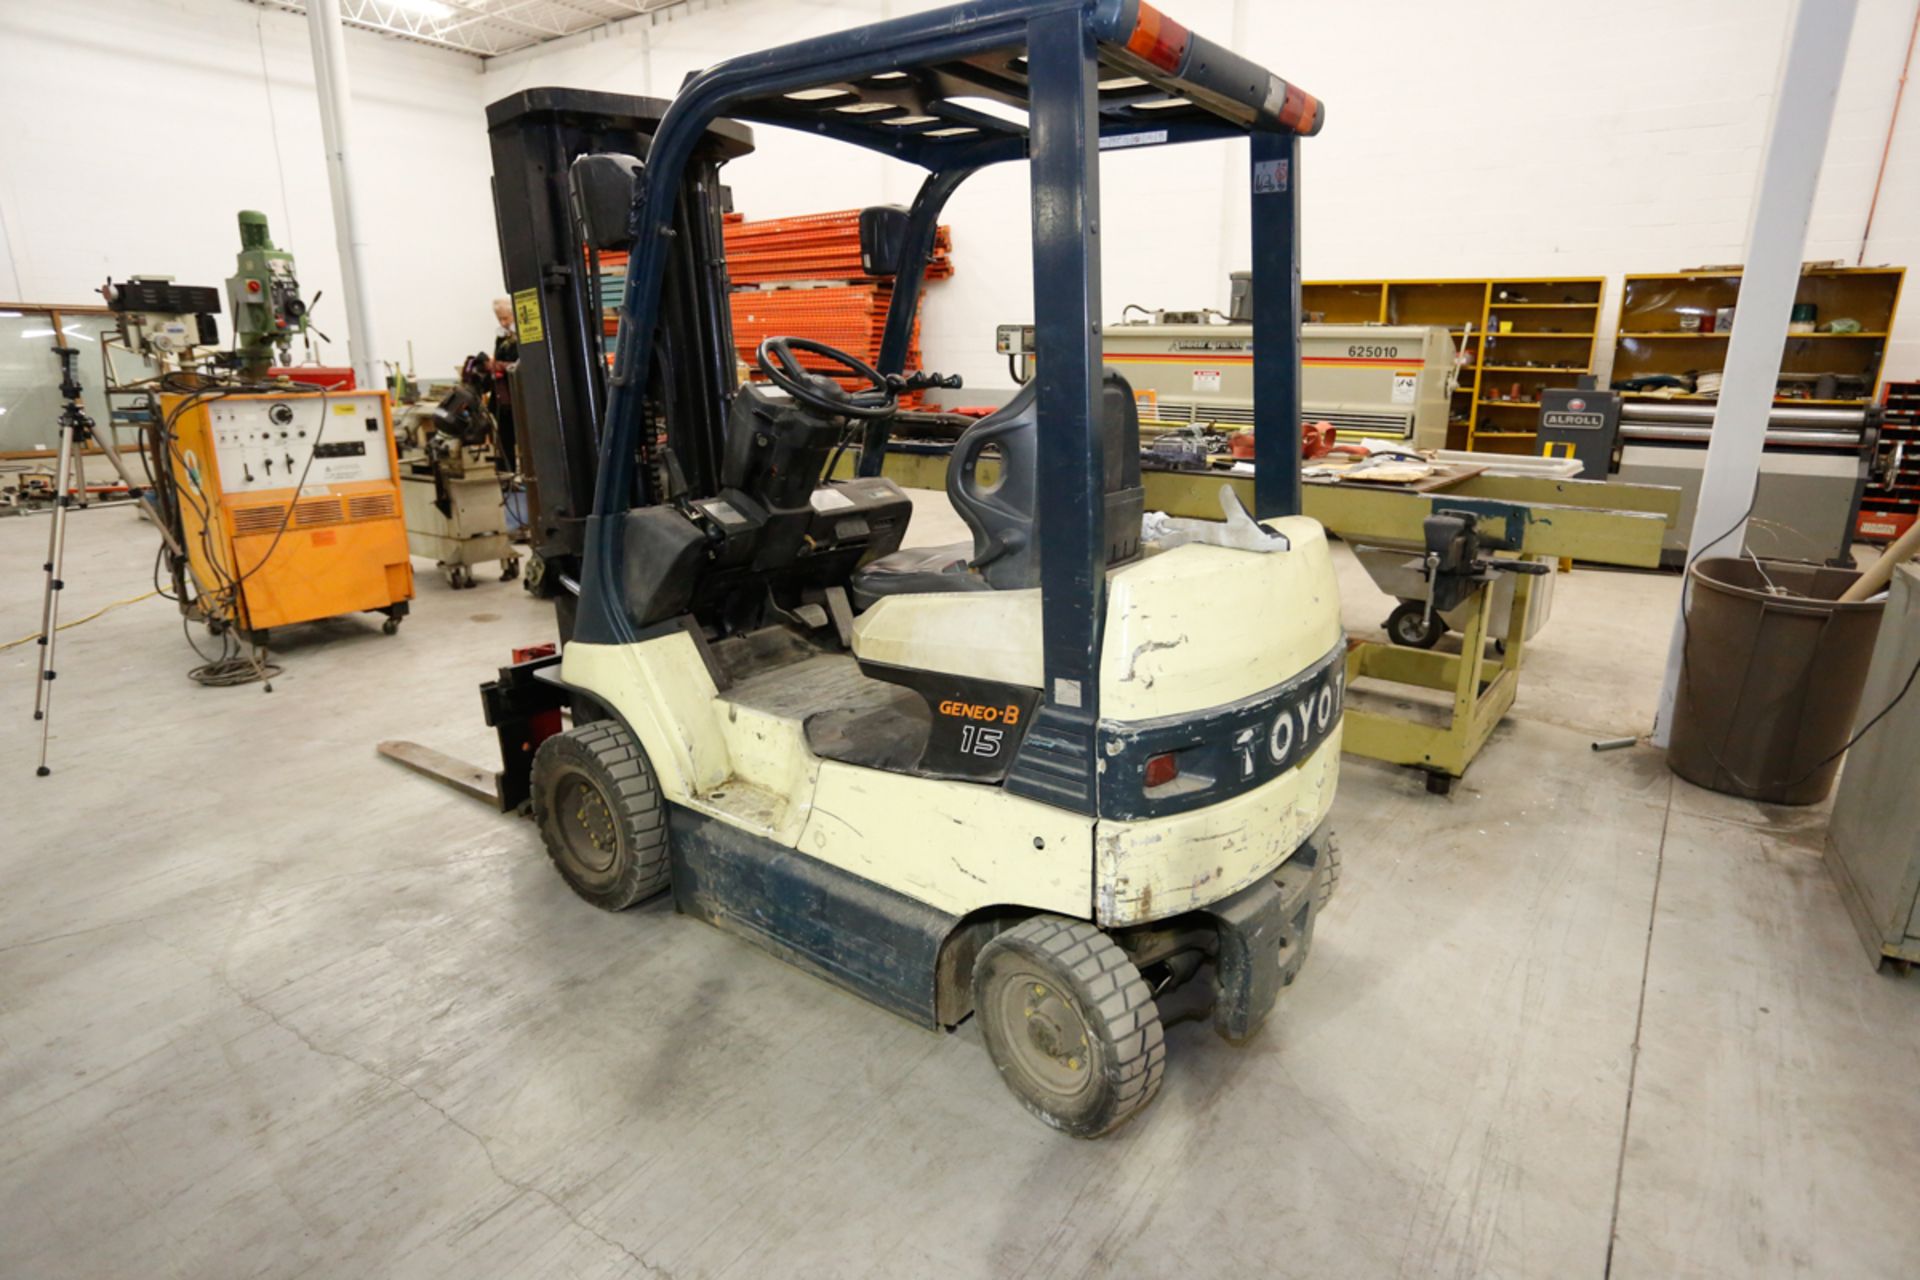 TOYOTA GENEO-B 15 ELECTRIC FORKLIFT MOD. 7FB;15, 1500 KG CAP., 3 STAGE, SIDESHIFT (1999) - Image 4 of 4